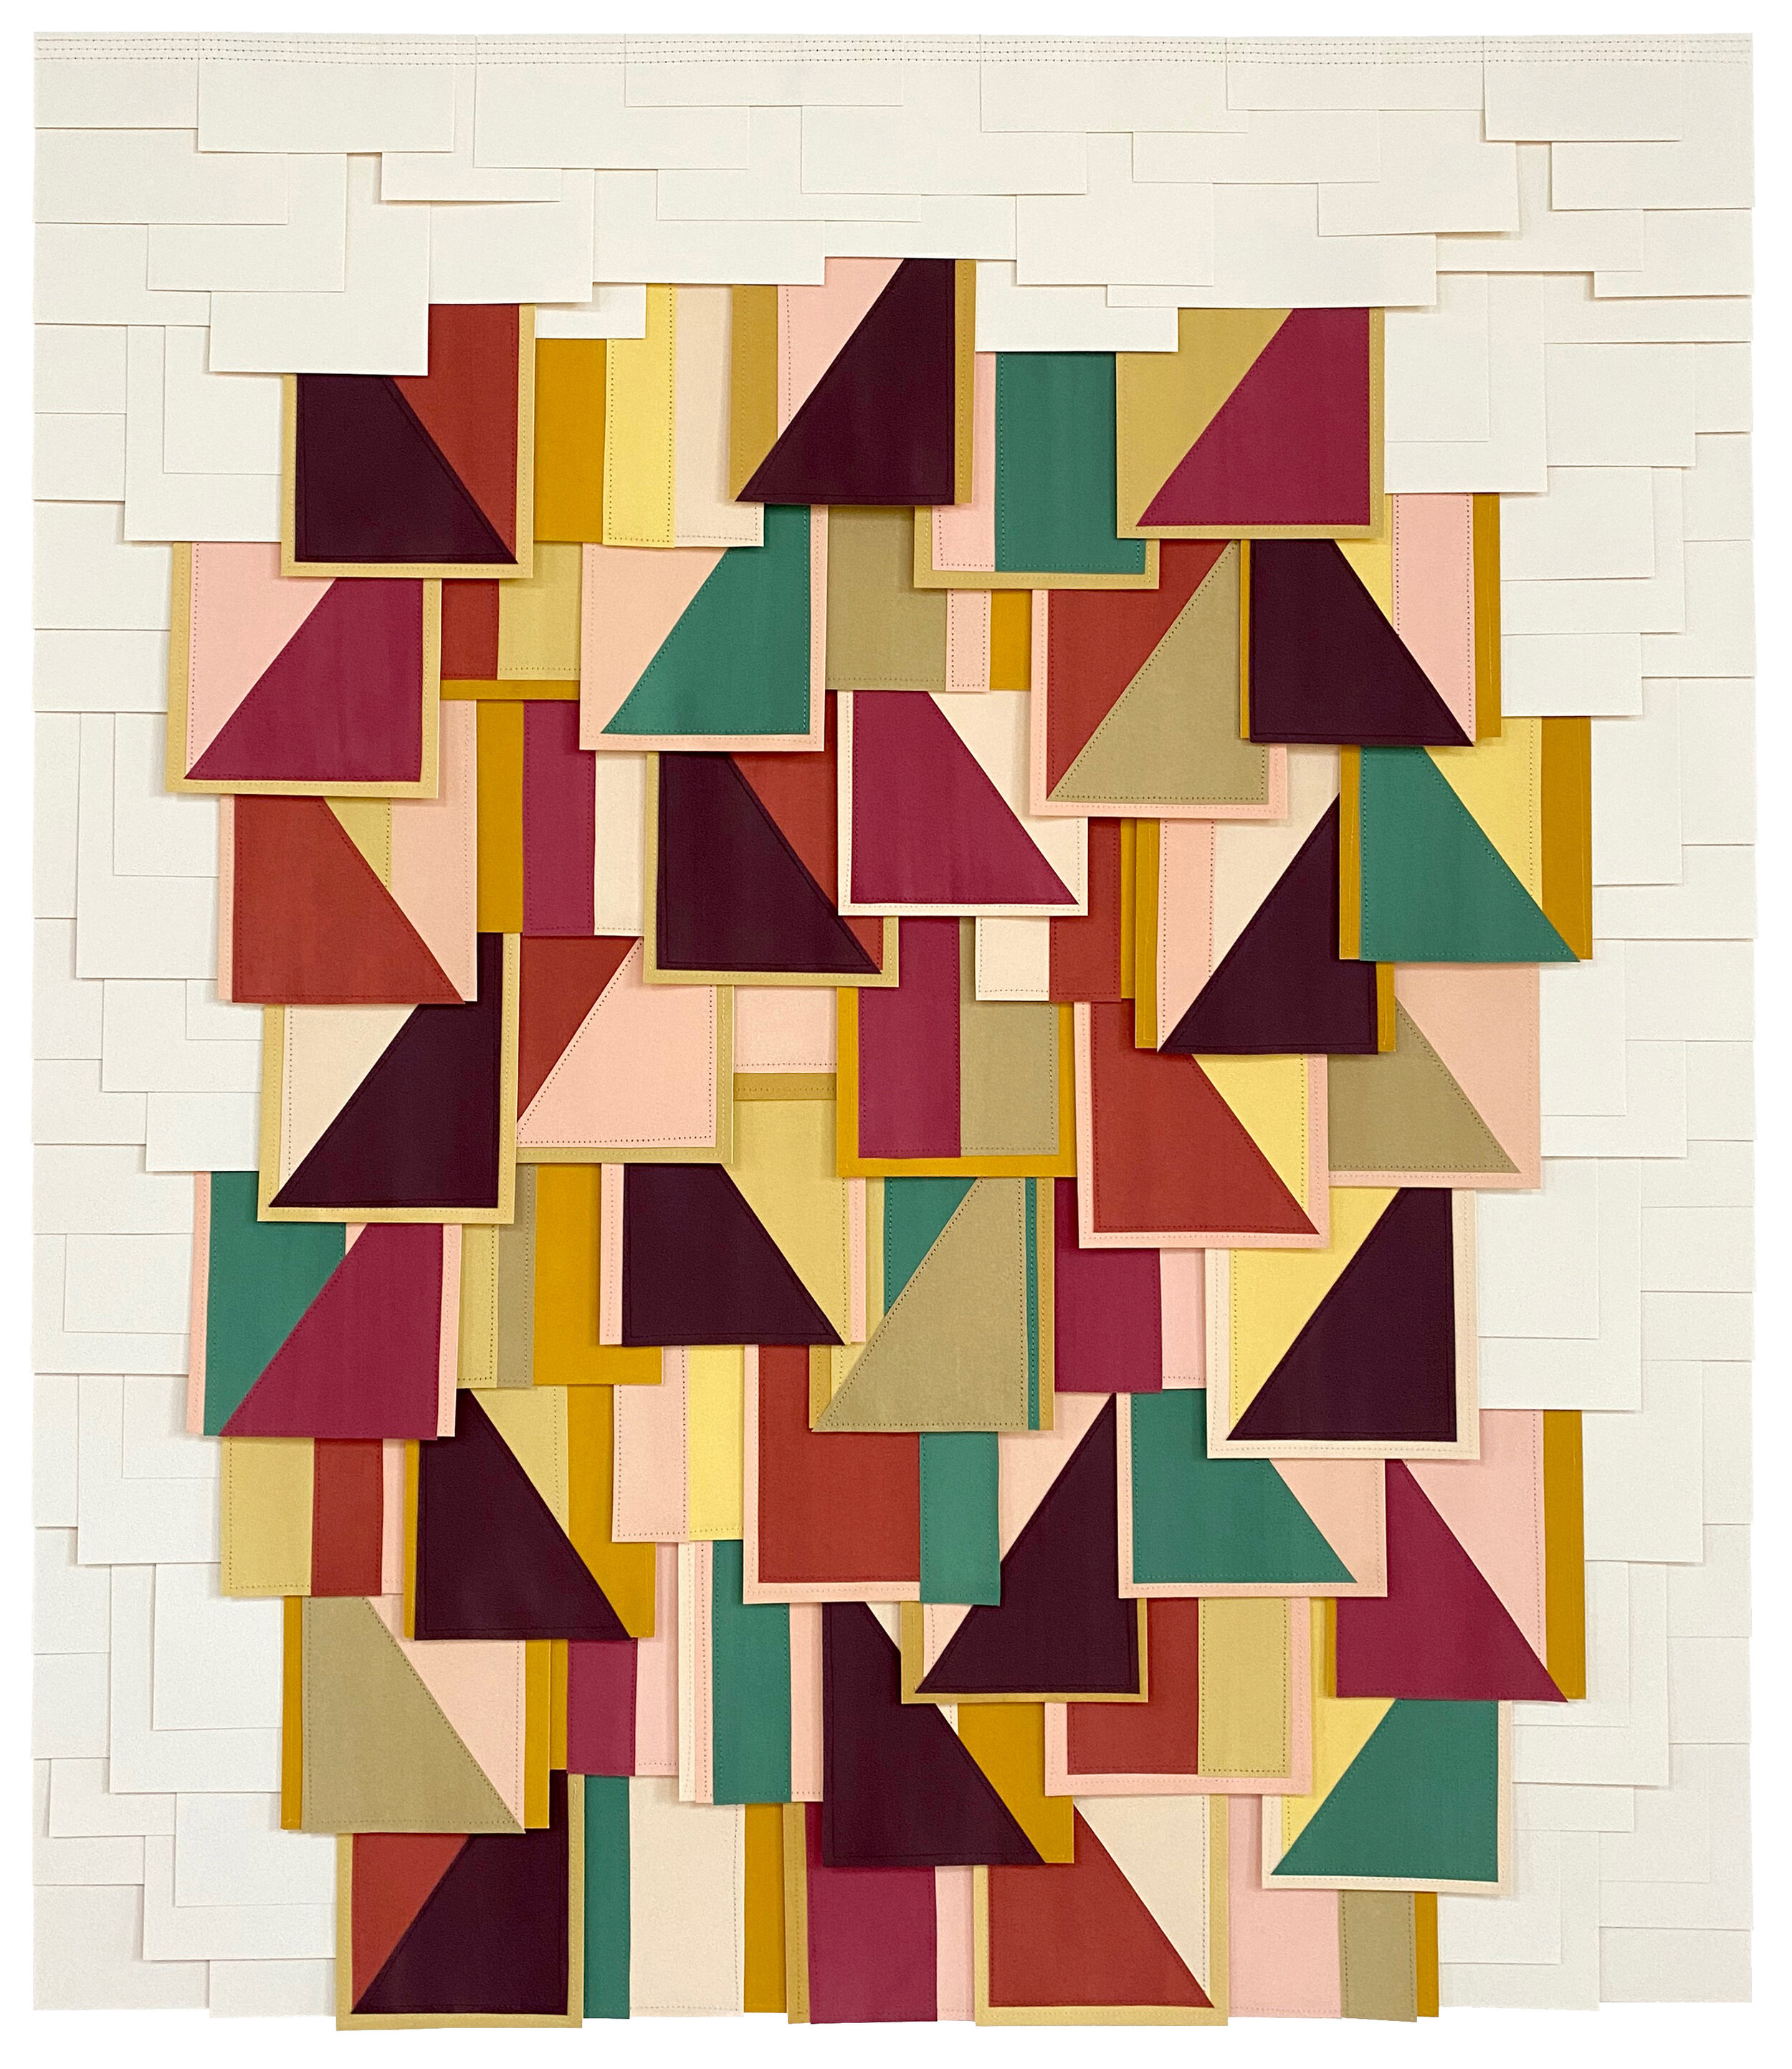 RAYMOND SAÁ | Untitled (PS202119), 42 x 36 inches / 107 x 91.5 cm, gouache collage on sewn paper, framed, 2021